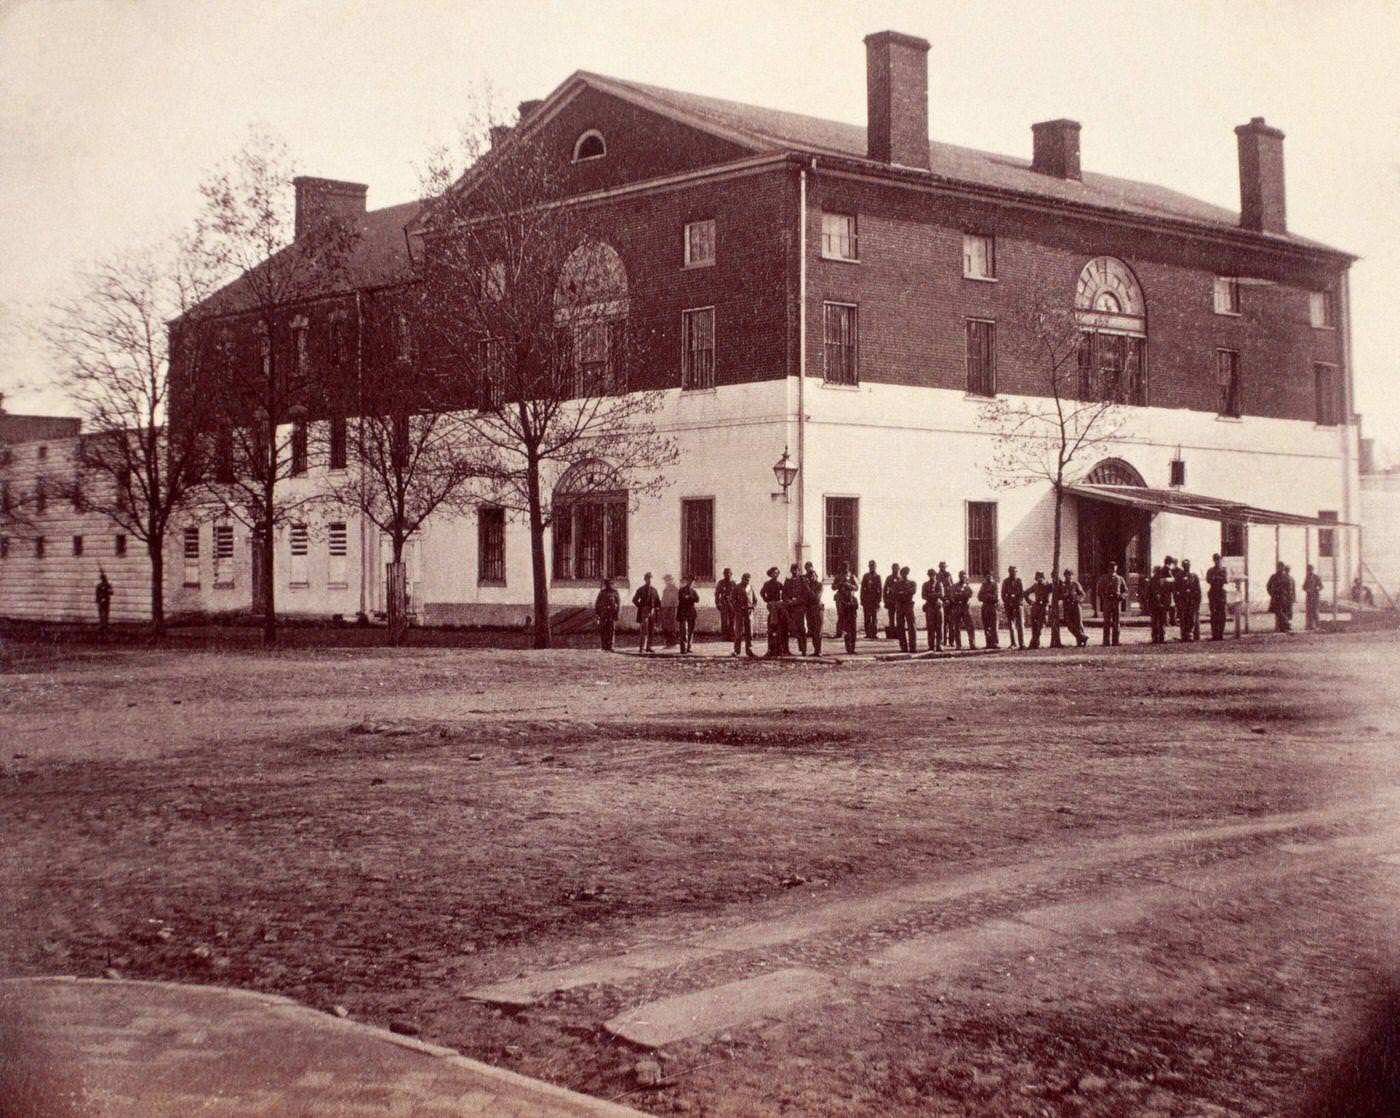 Union soldiers pose outside the Old Capitol Prison in Washington, D.C. During the American Civil War the prison was used to incarcerate political prisoners and prisoners of war.